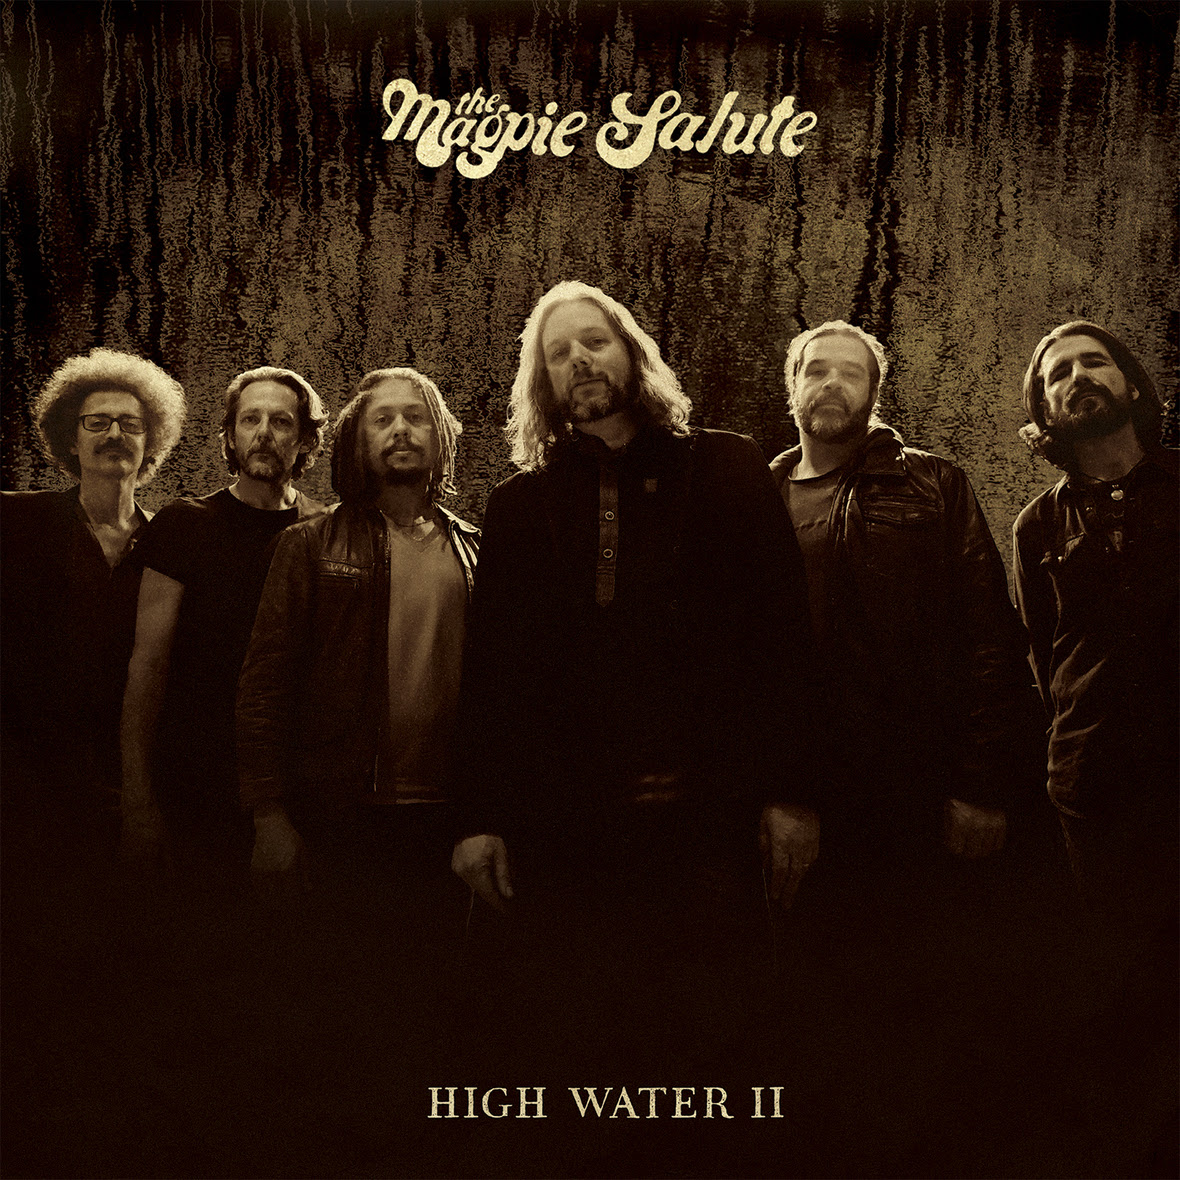 The Magpie Salute, High Water II